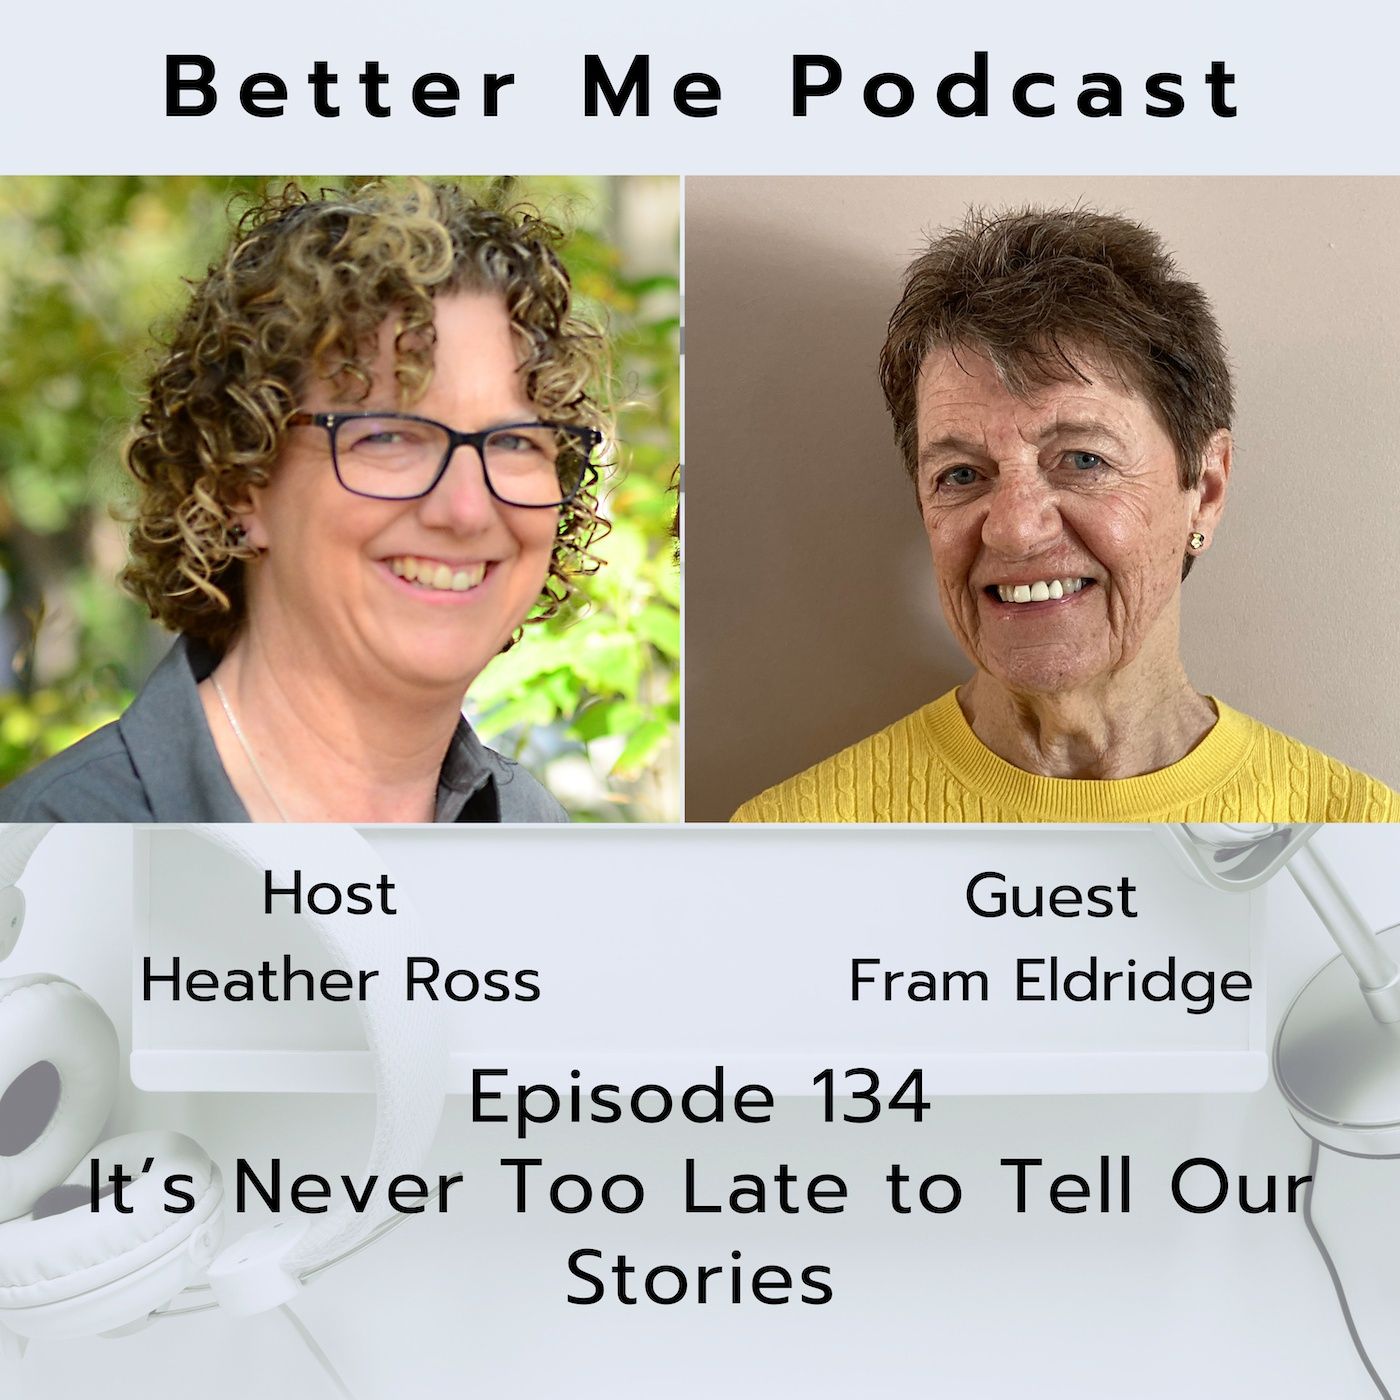 EP 134 It's Never Too Late to Tell Our Stories (with Fran Eldridge)